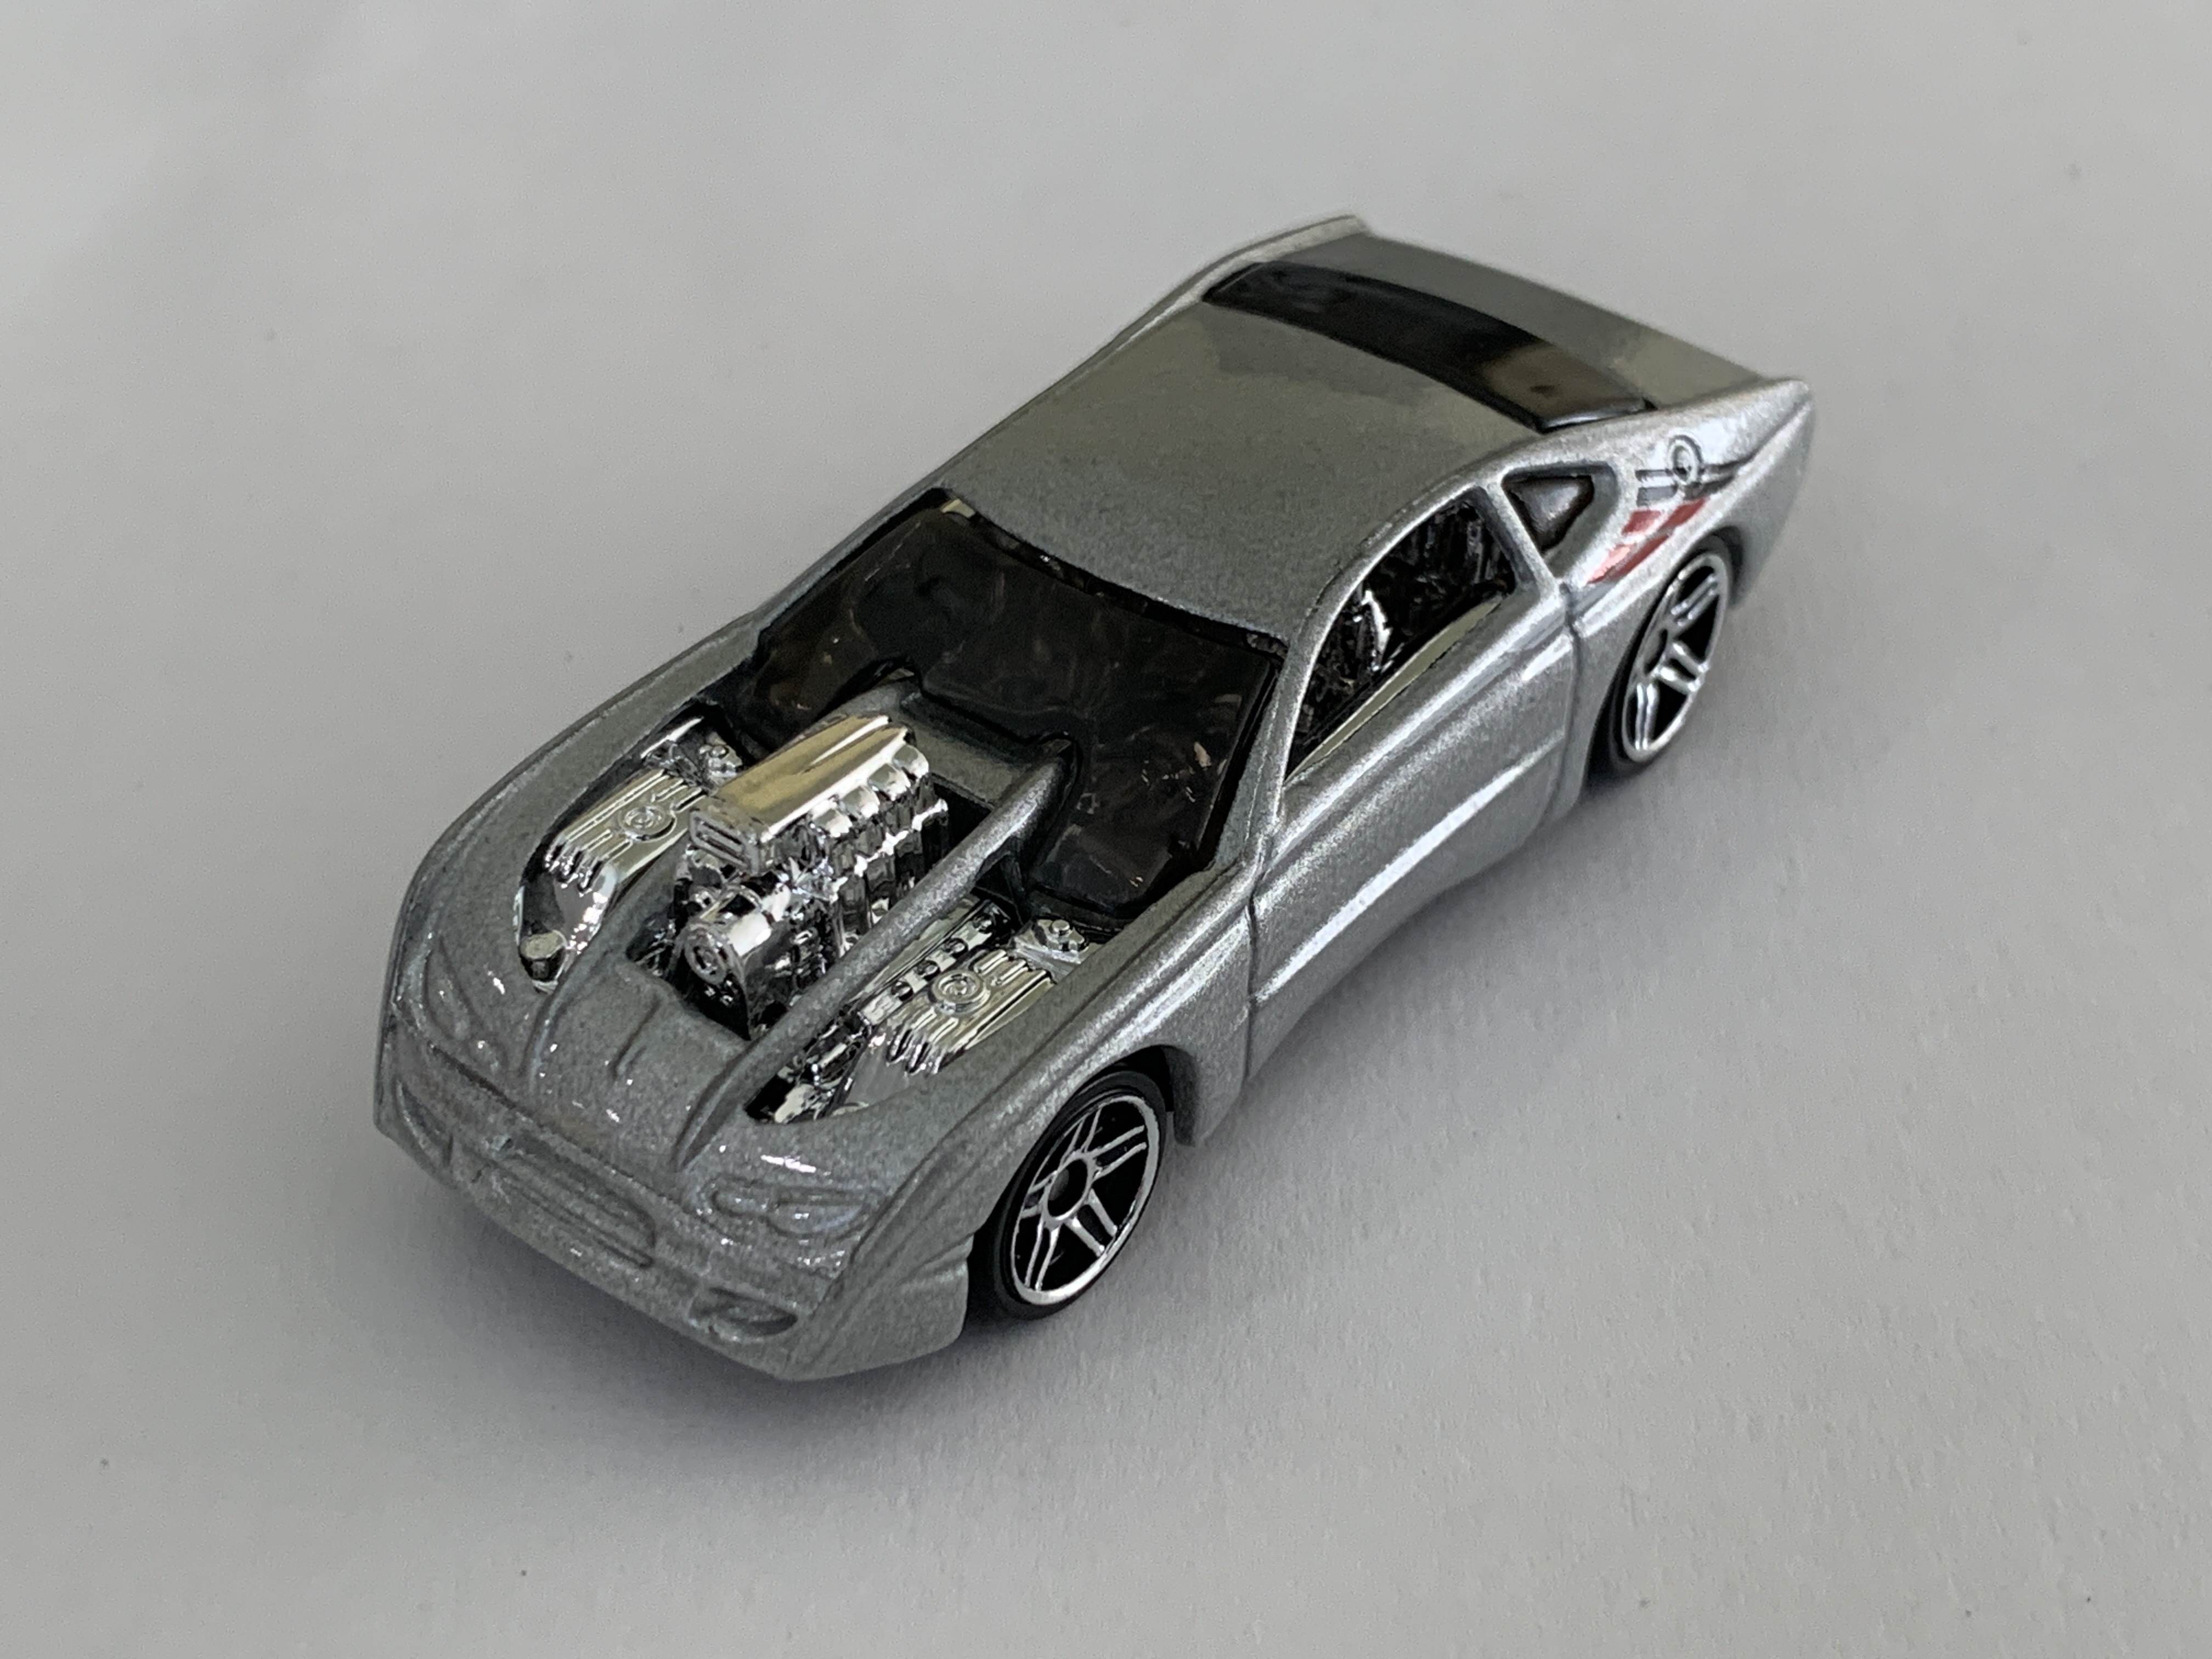 Hot Wheels Overbored 454